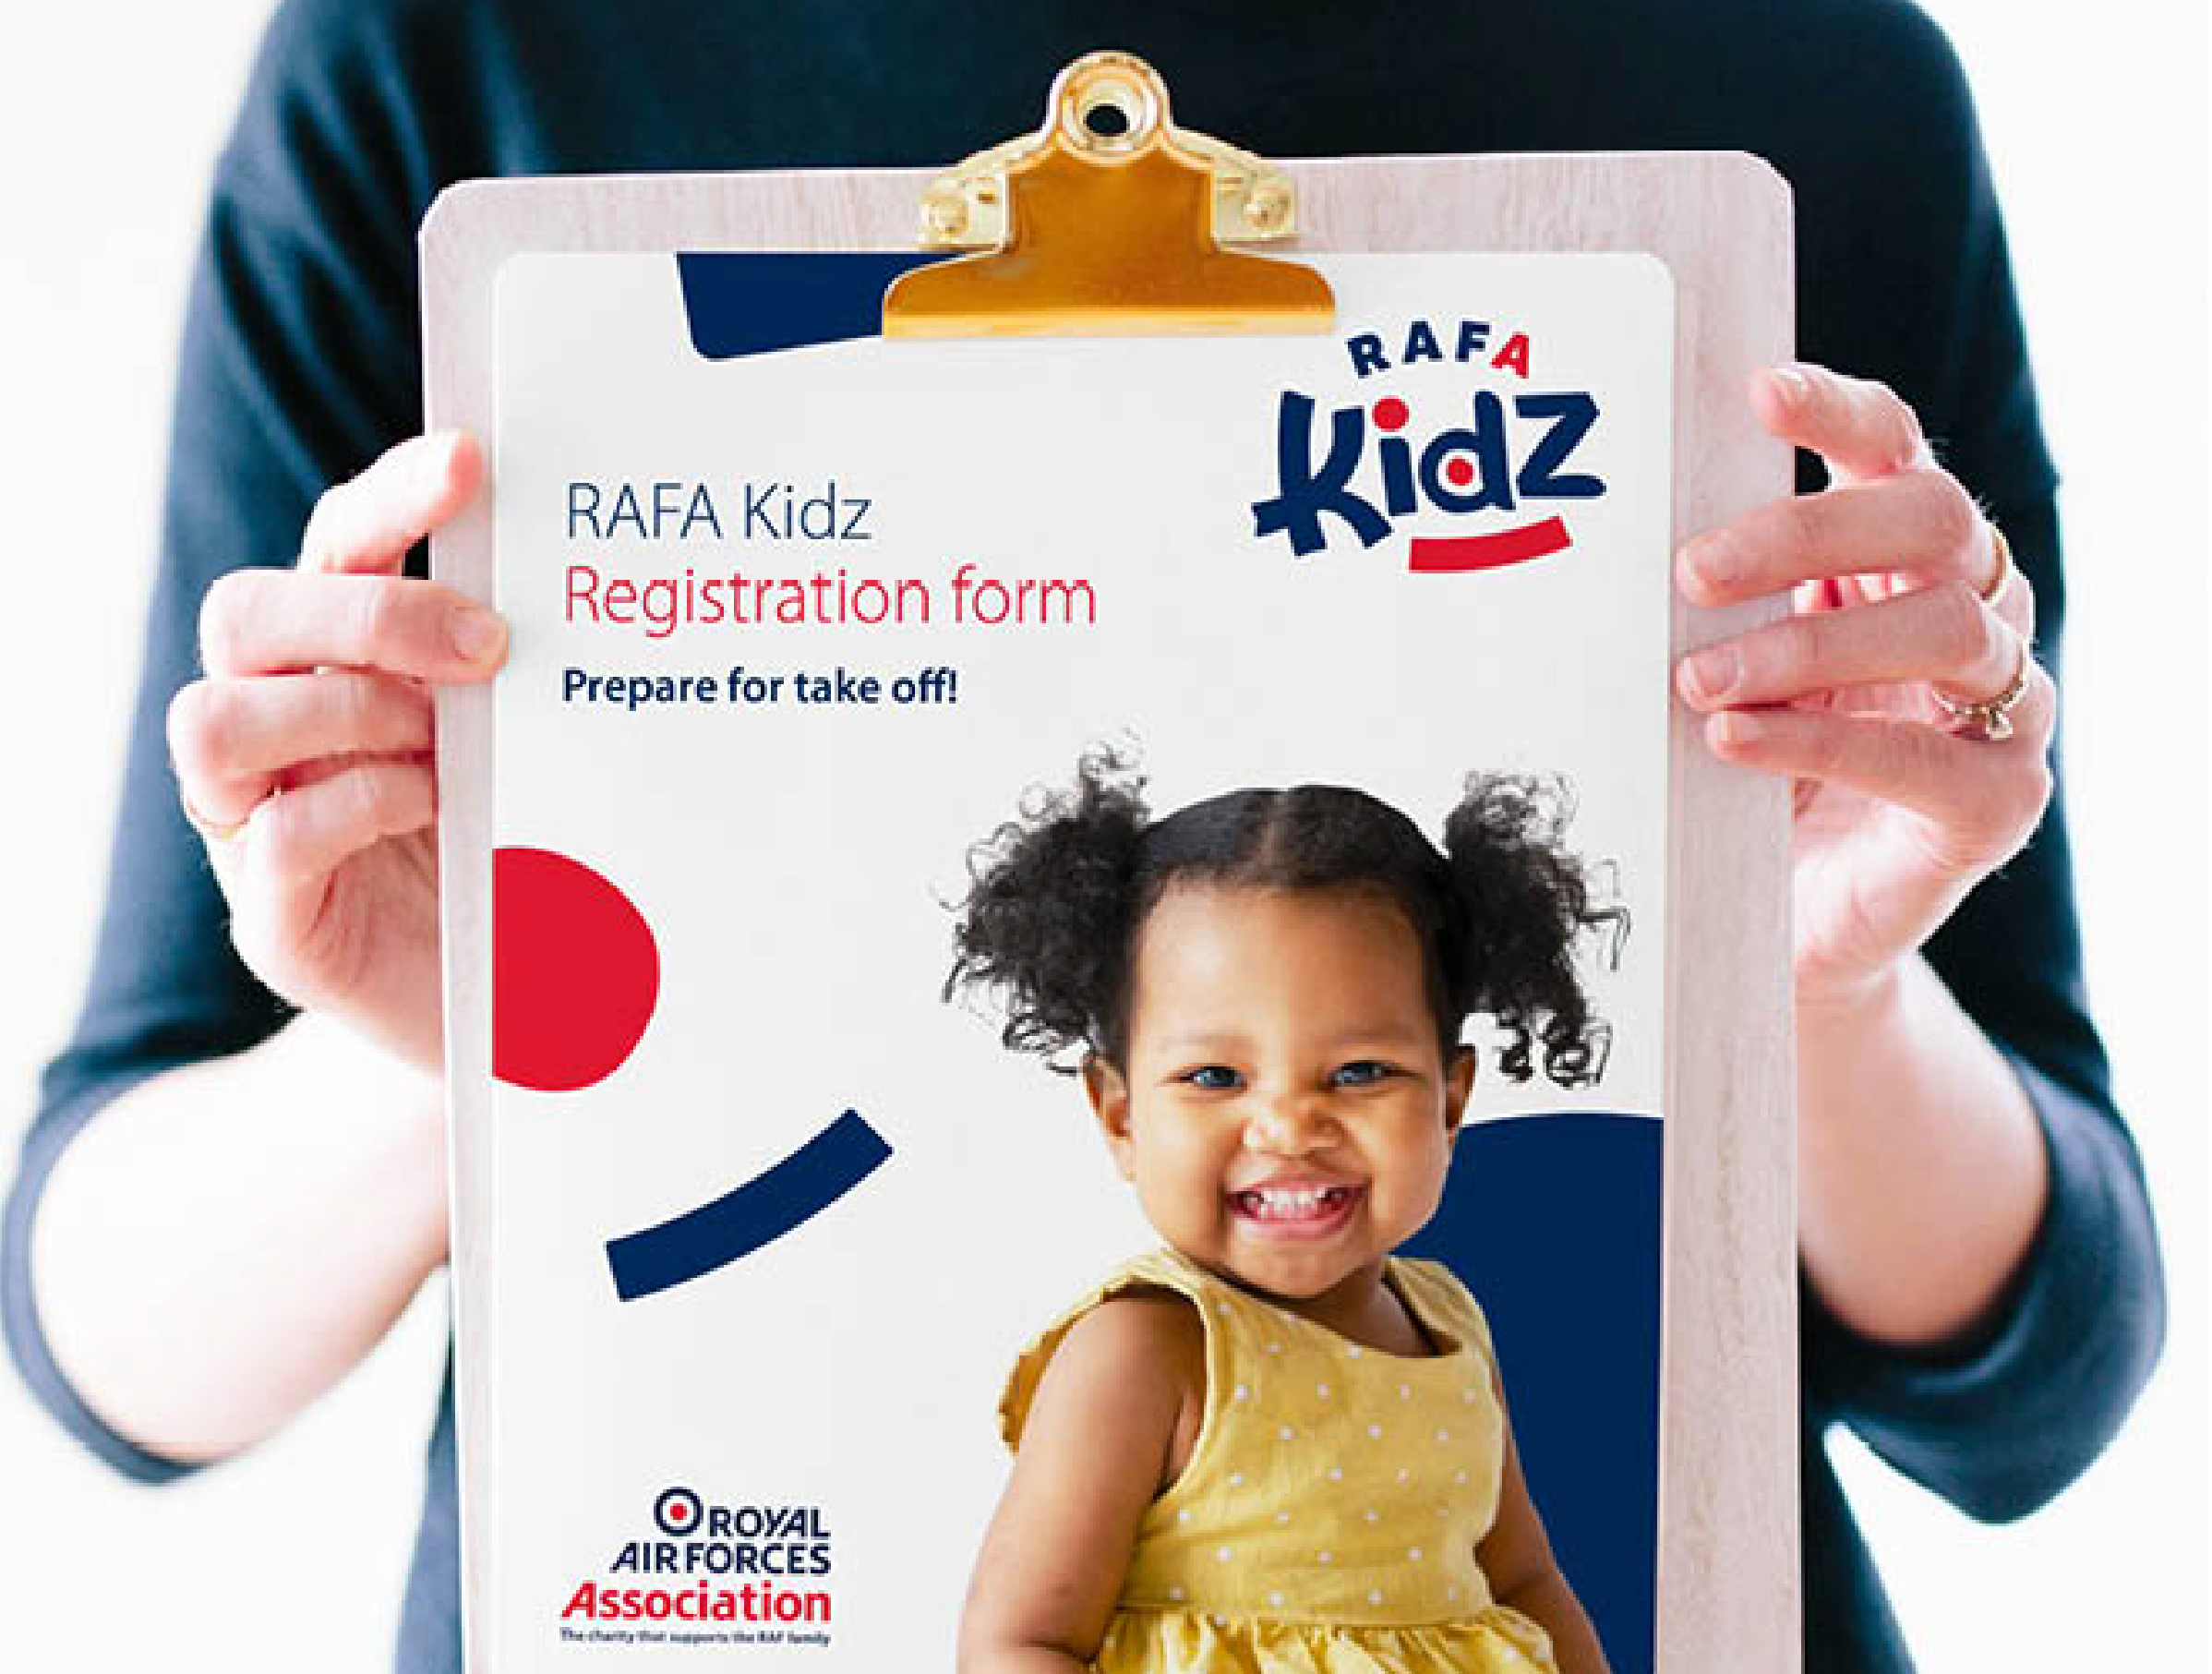 RAFA Kidz registration form featuring a small girl with cute pigtails 